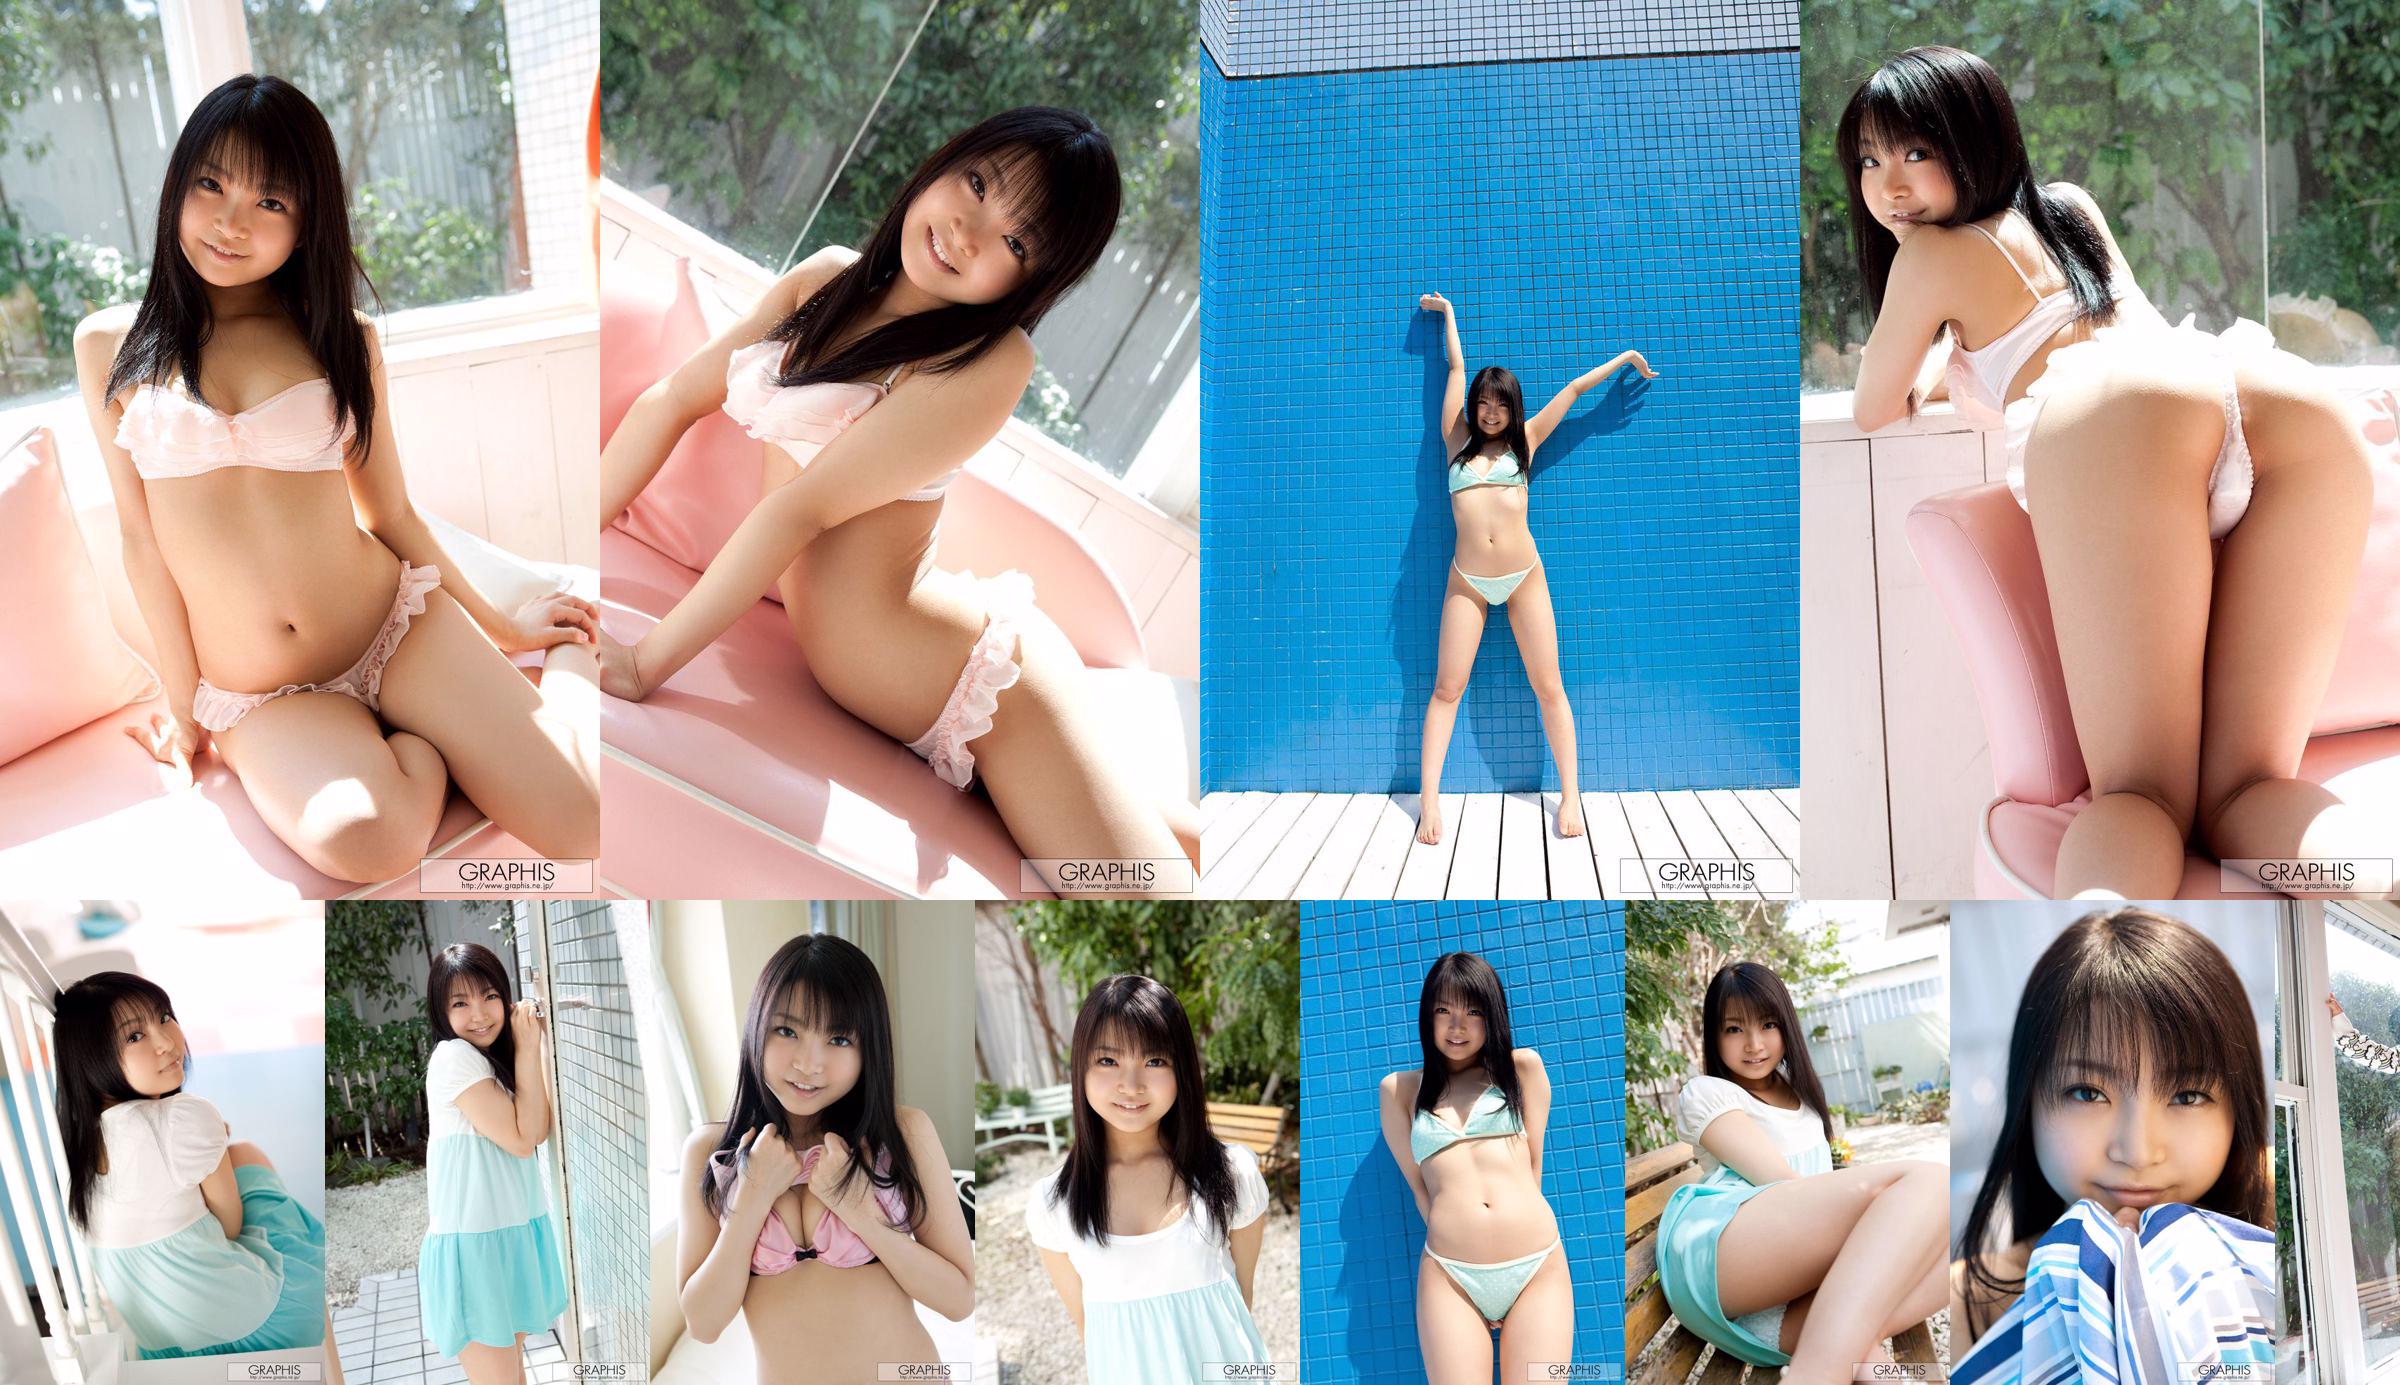 Chihiro Aoi / Chihiro Aoi [Graphis] First Gravure First off daughter No.7abf0b Page 11